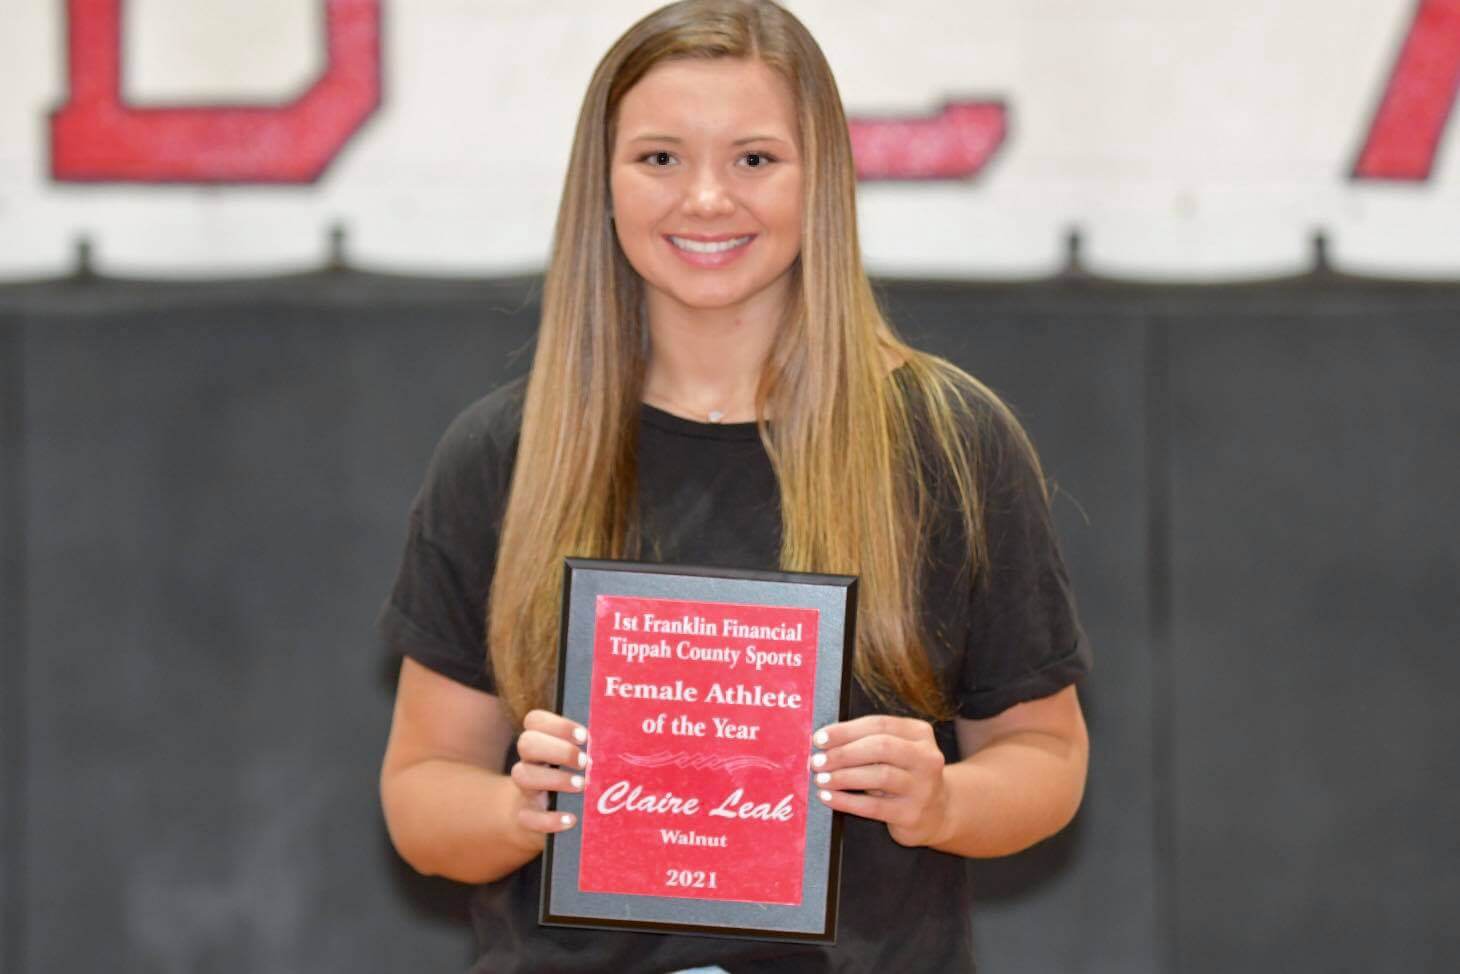 First Franklin Financial Tippah County Female Athlete of the Year: Claire Leak